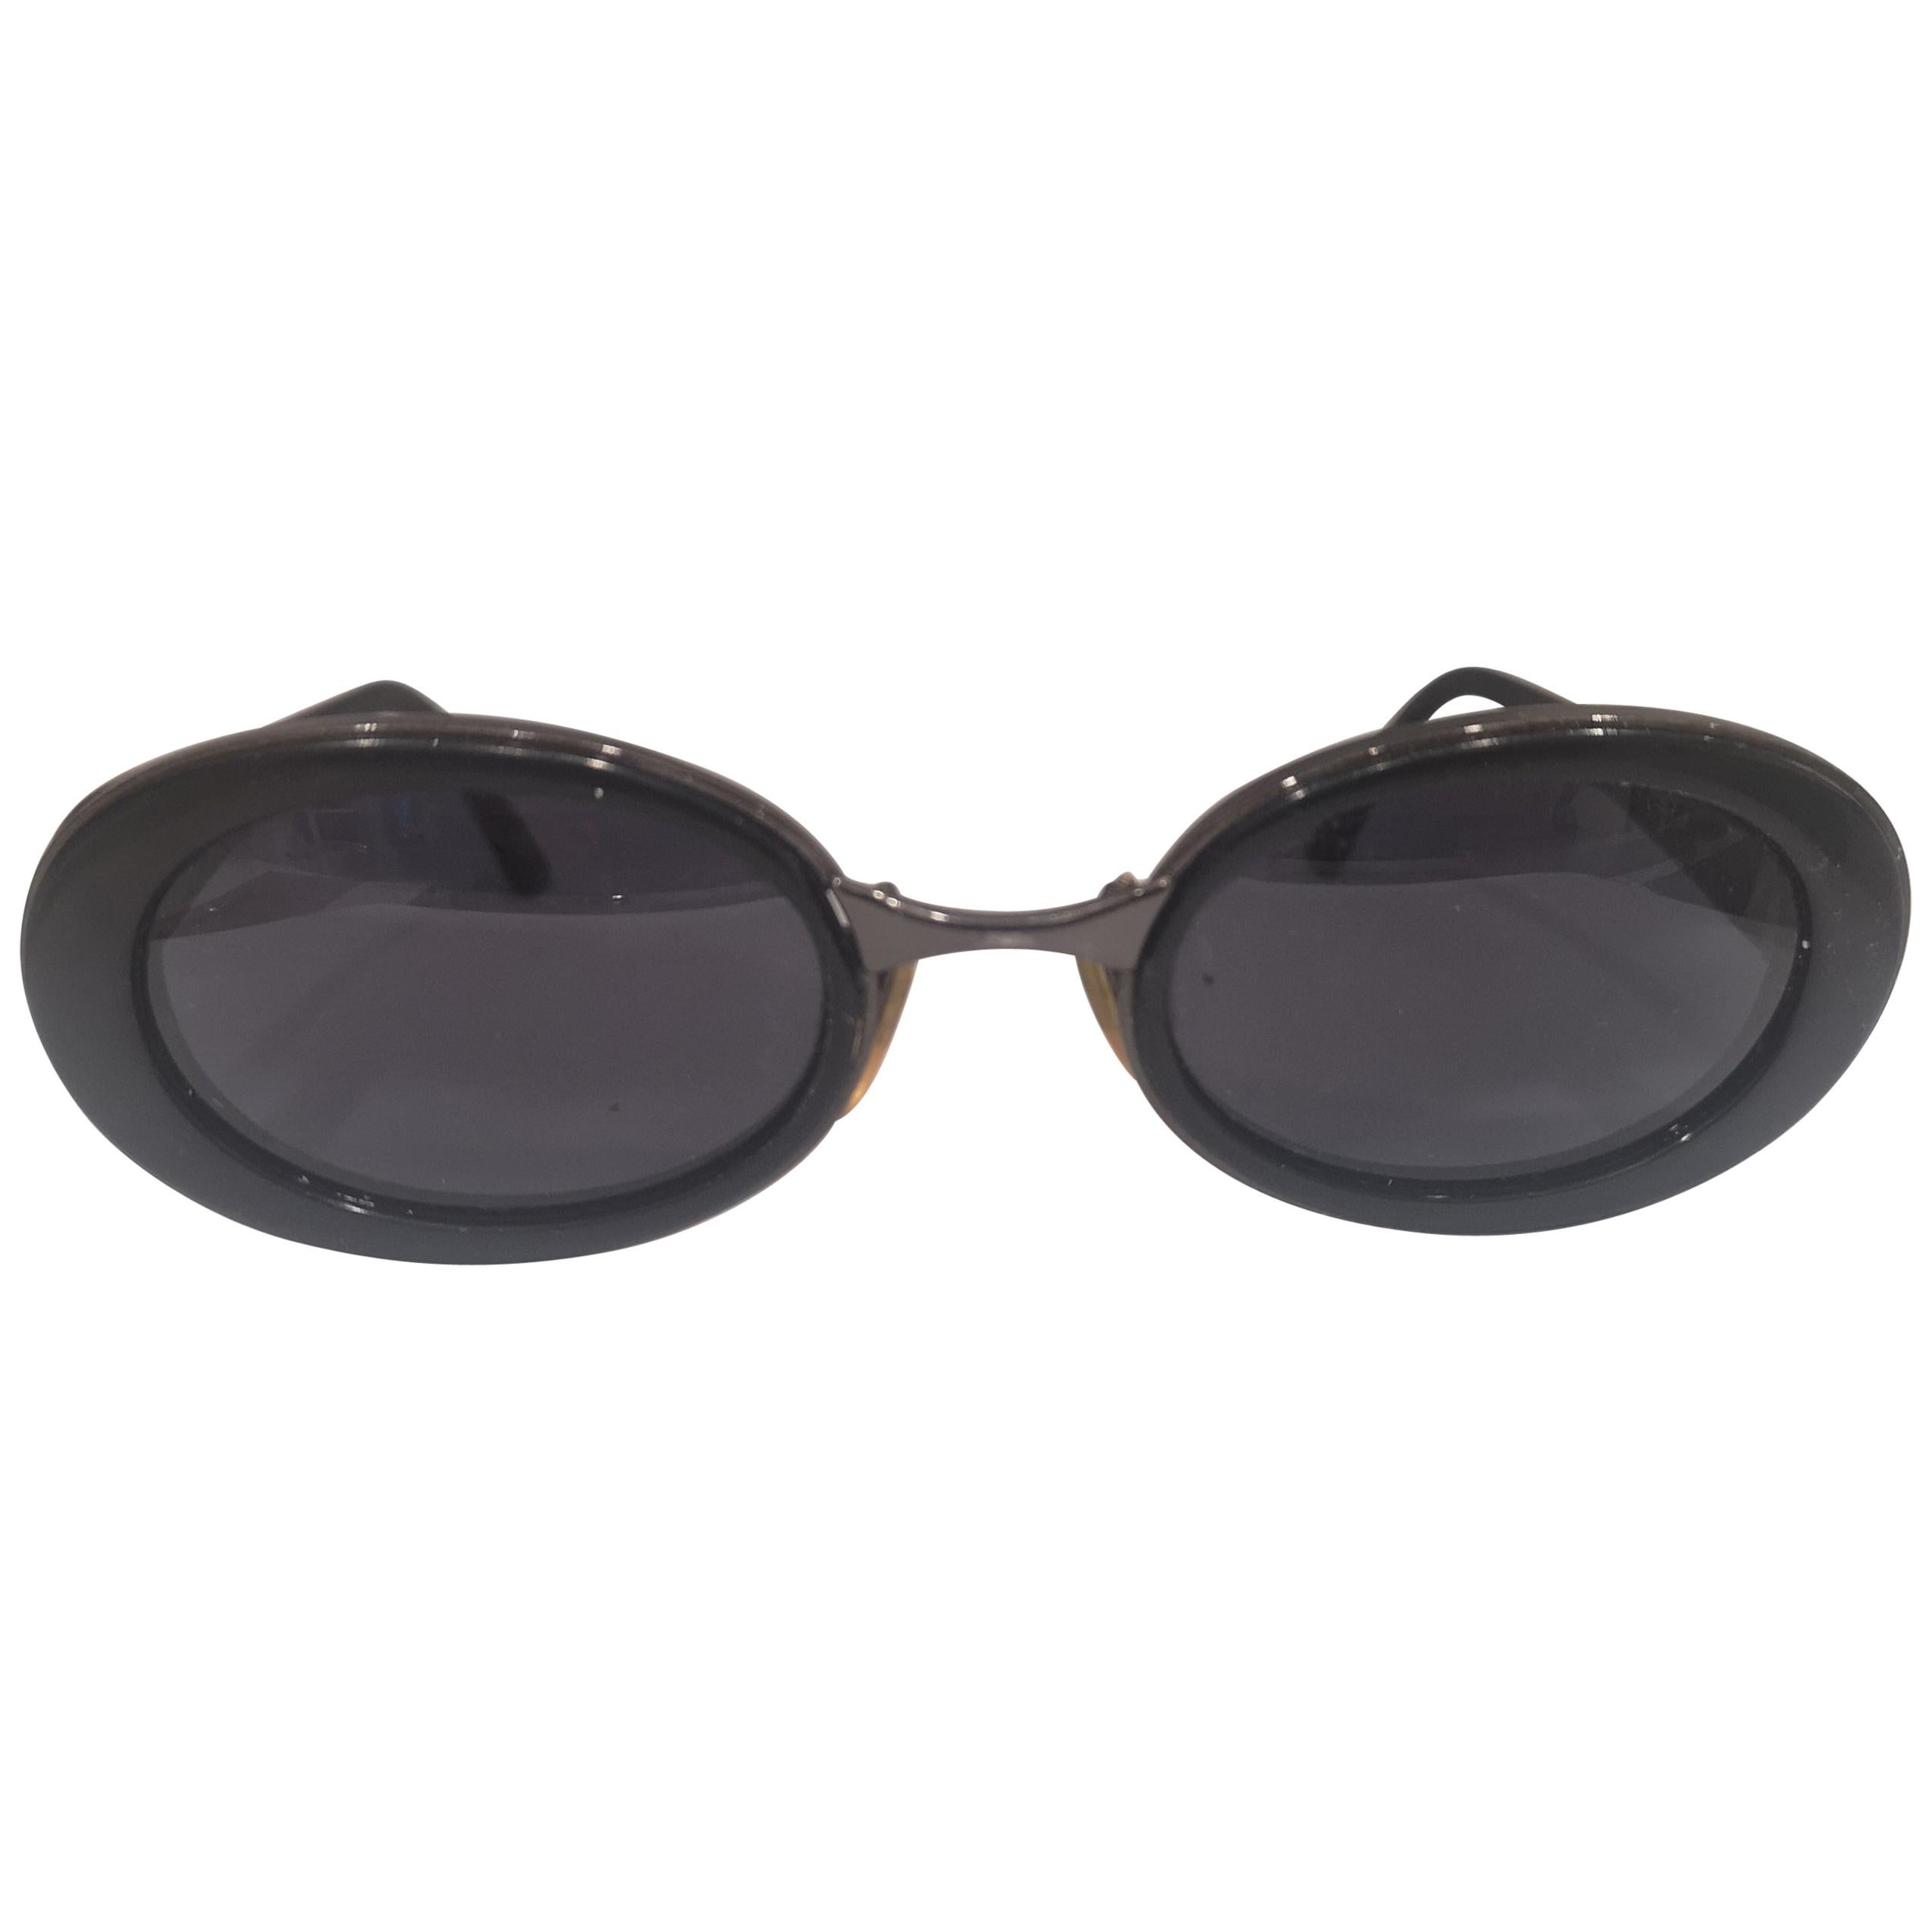 Genny by Gianni Versace black sunglasses